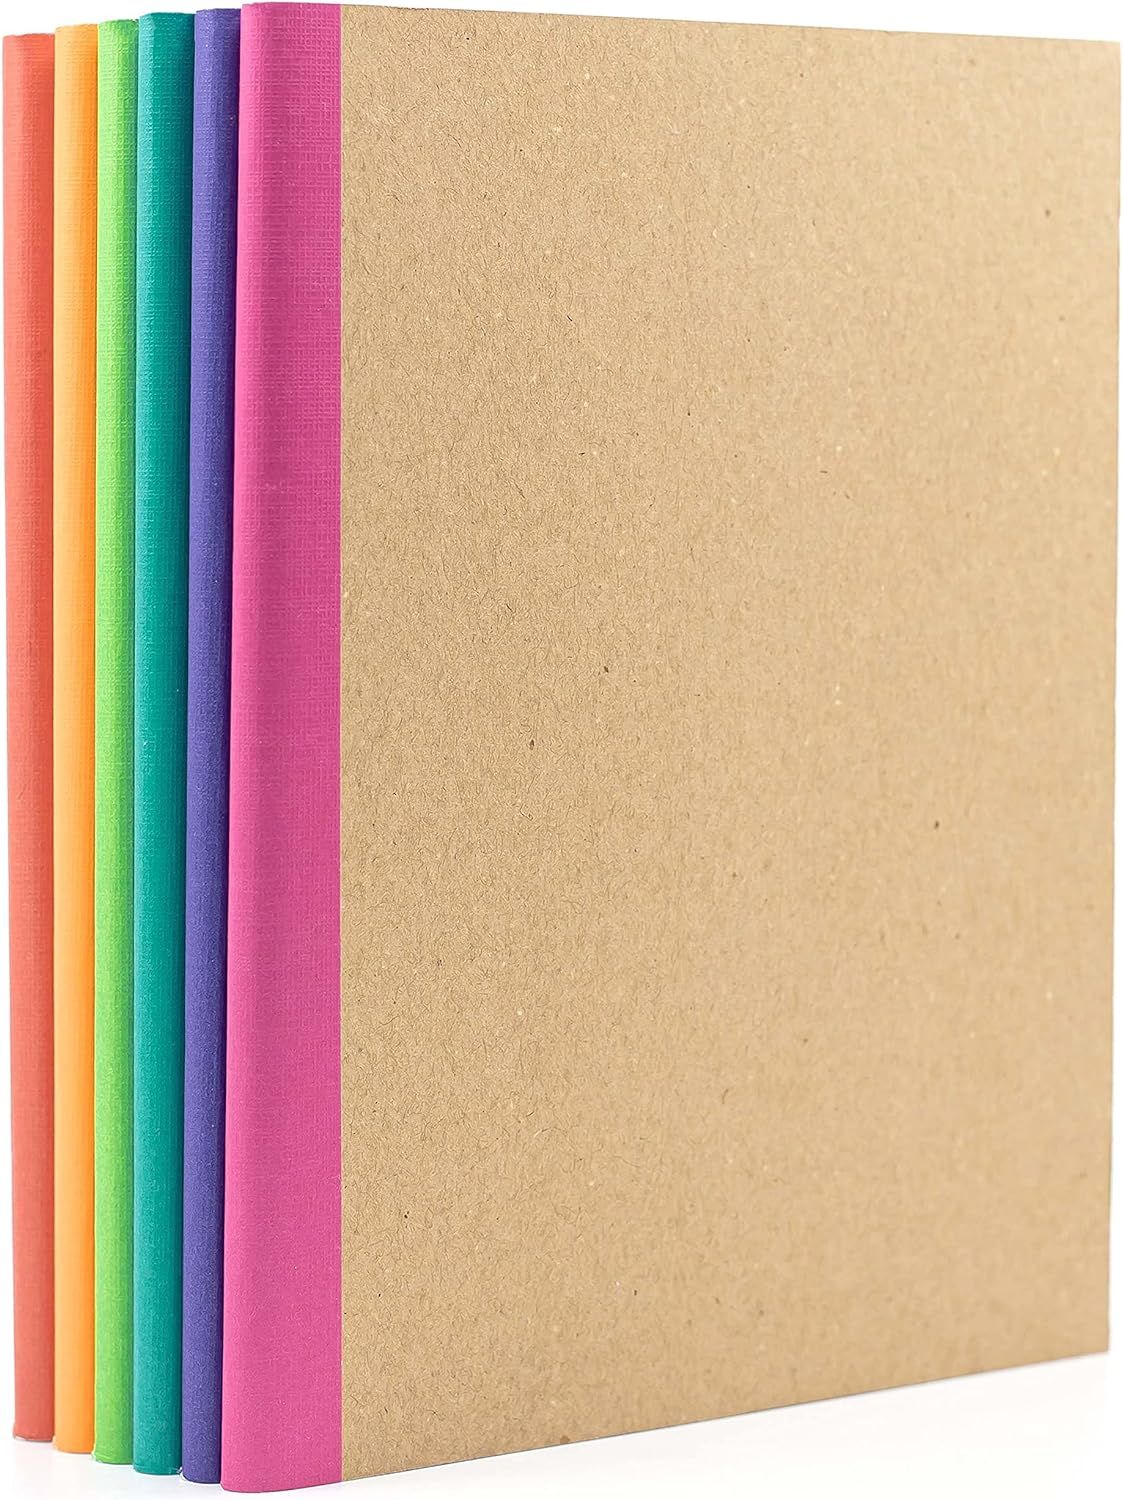 PAPERAGE 6-Pack Composition Notebook Journals, Kraft Cover with Rainbow Spines, 120 Pages,Lined P... | Amazon (US)